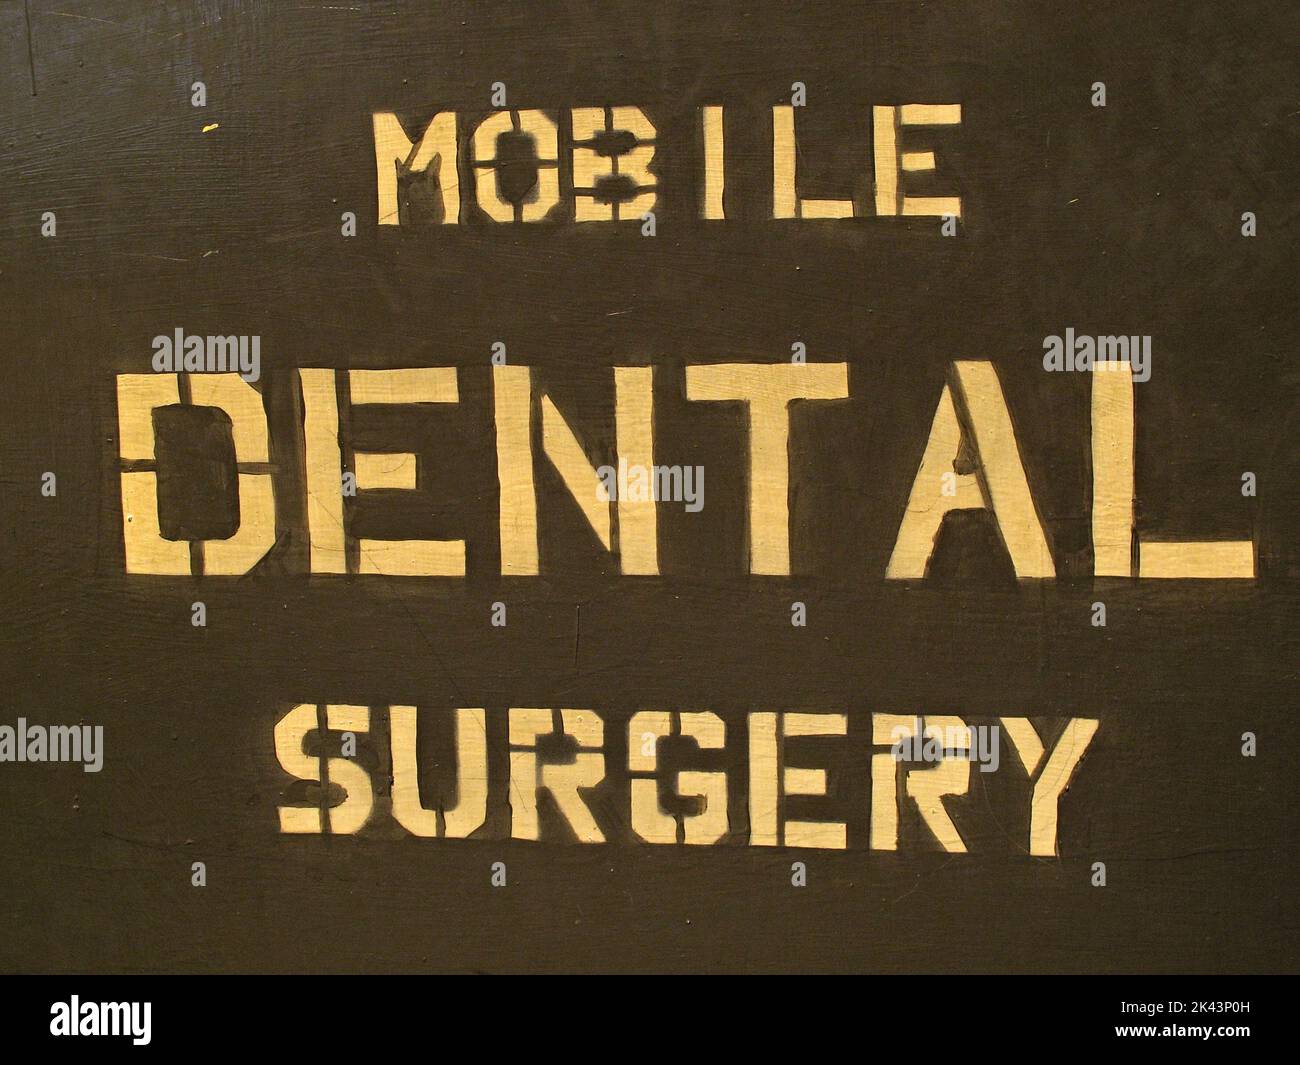 Mobile dental Surgery sign, the way forward for NHS dentists and improving dental care? Stock Photo